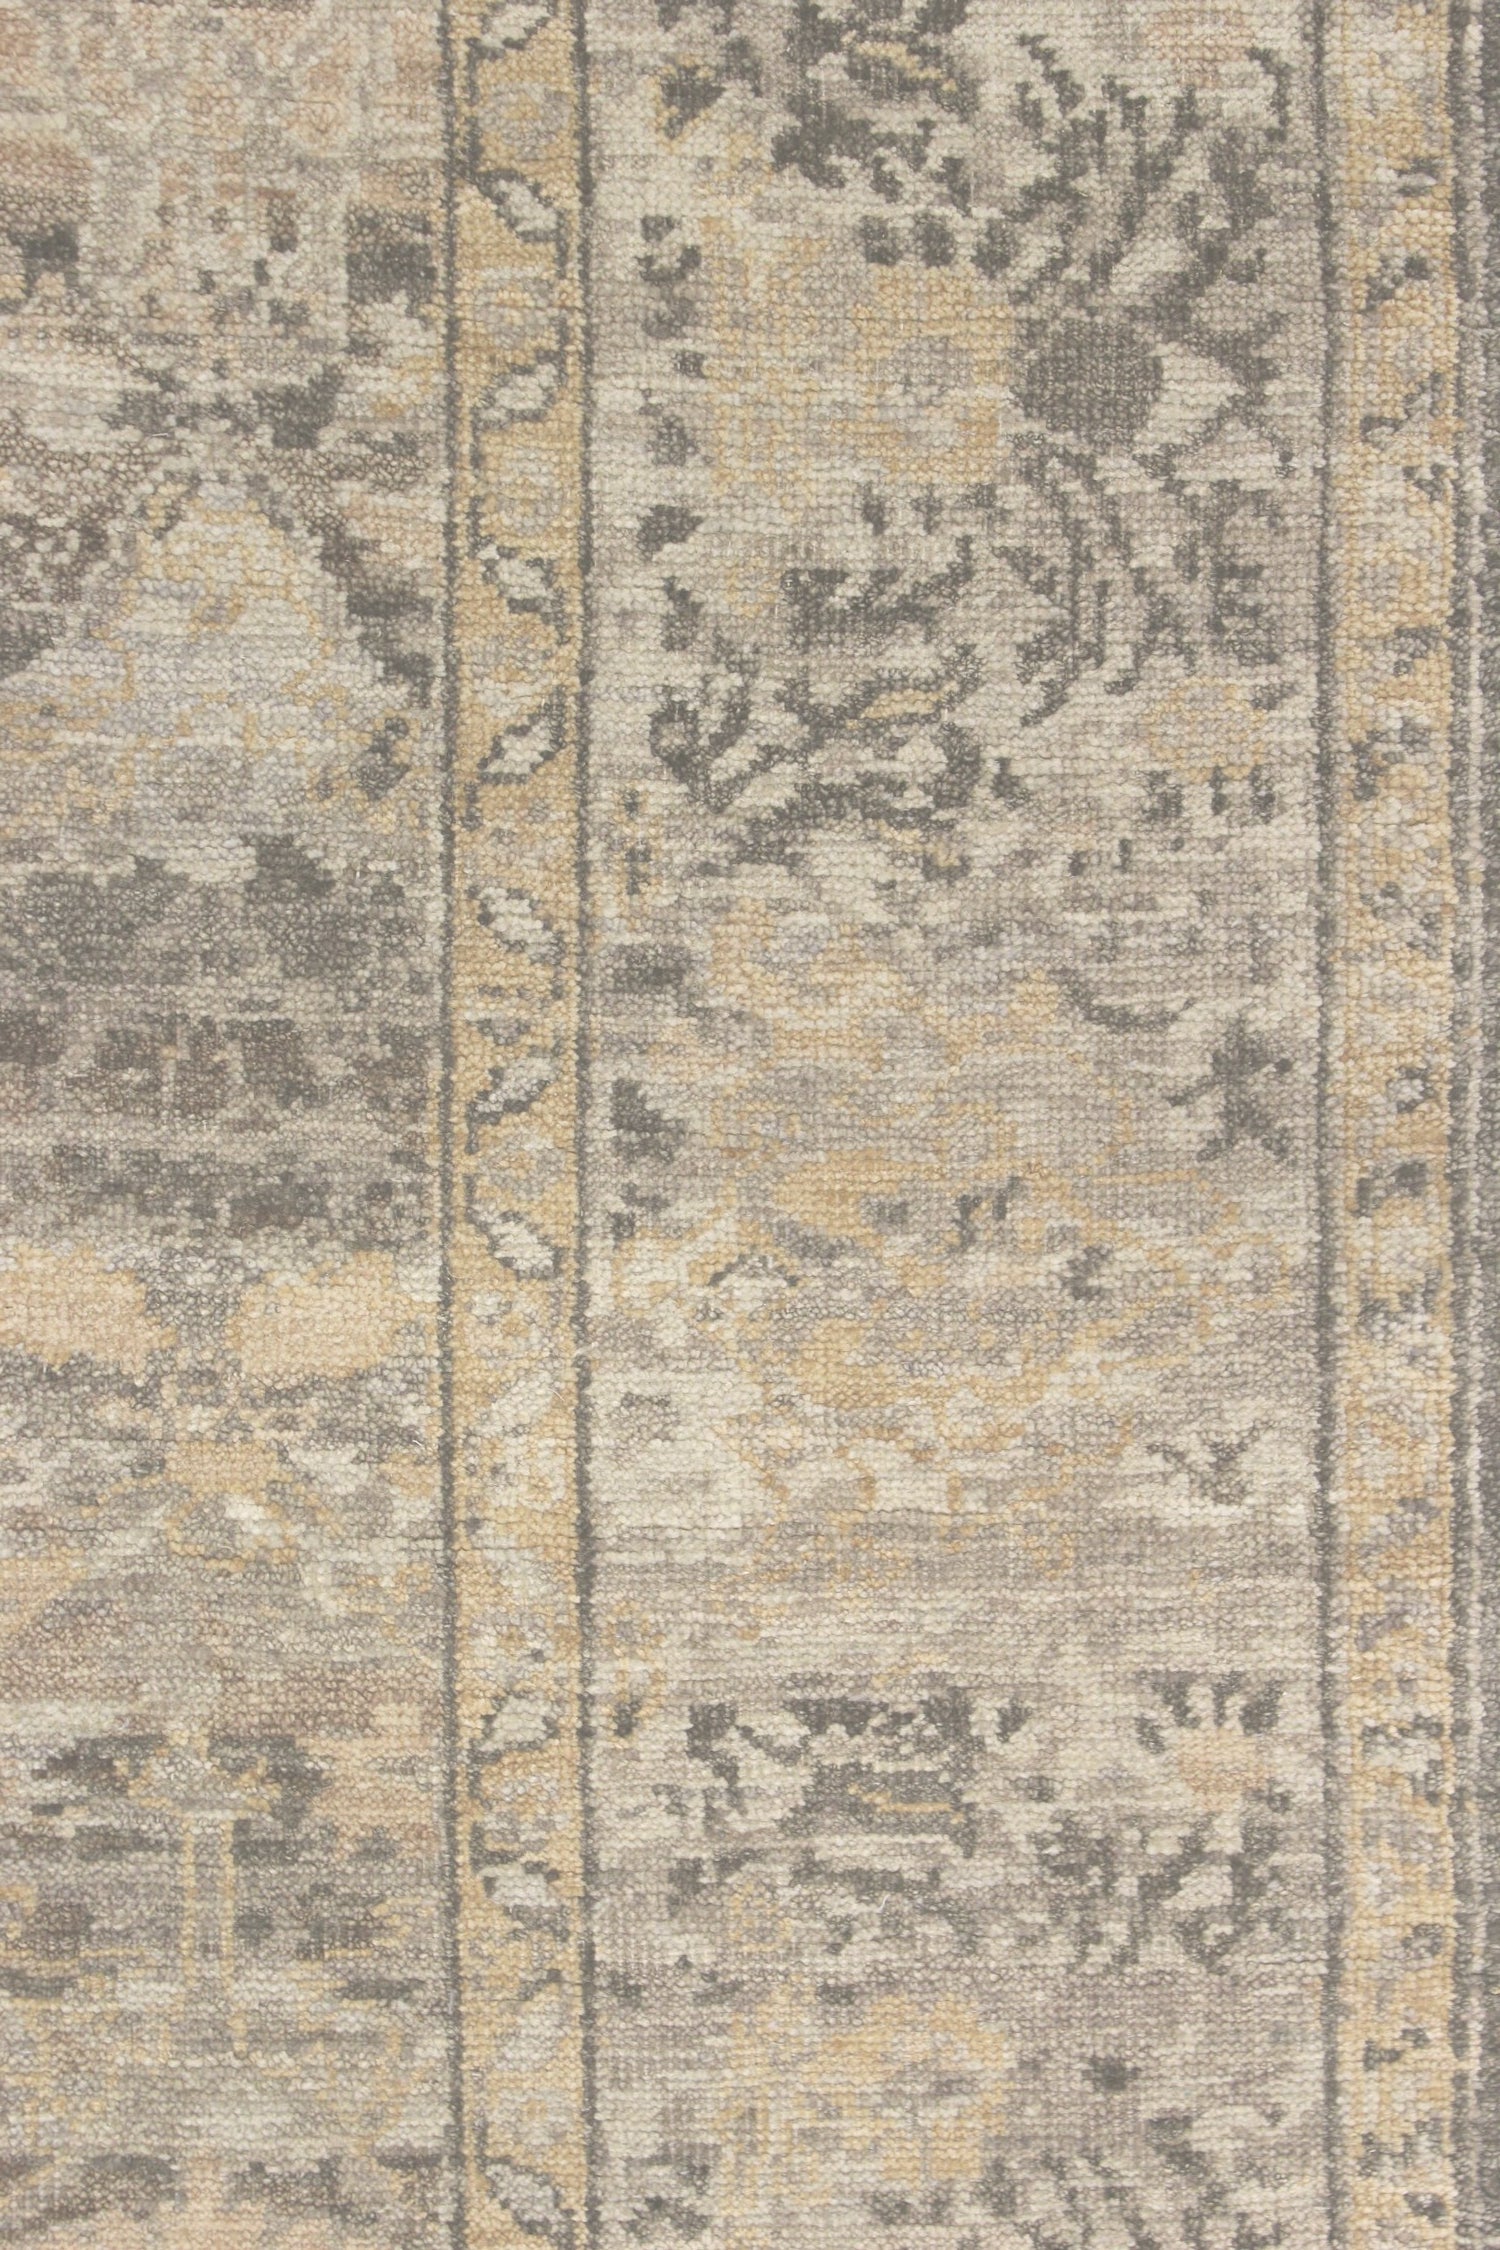 Sultanabad Handwoven Transitional Rug, J69595